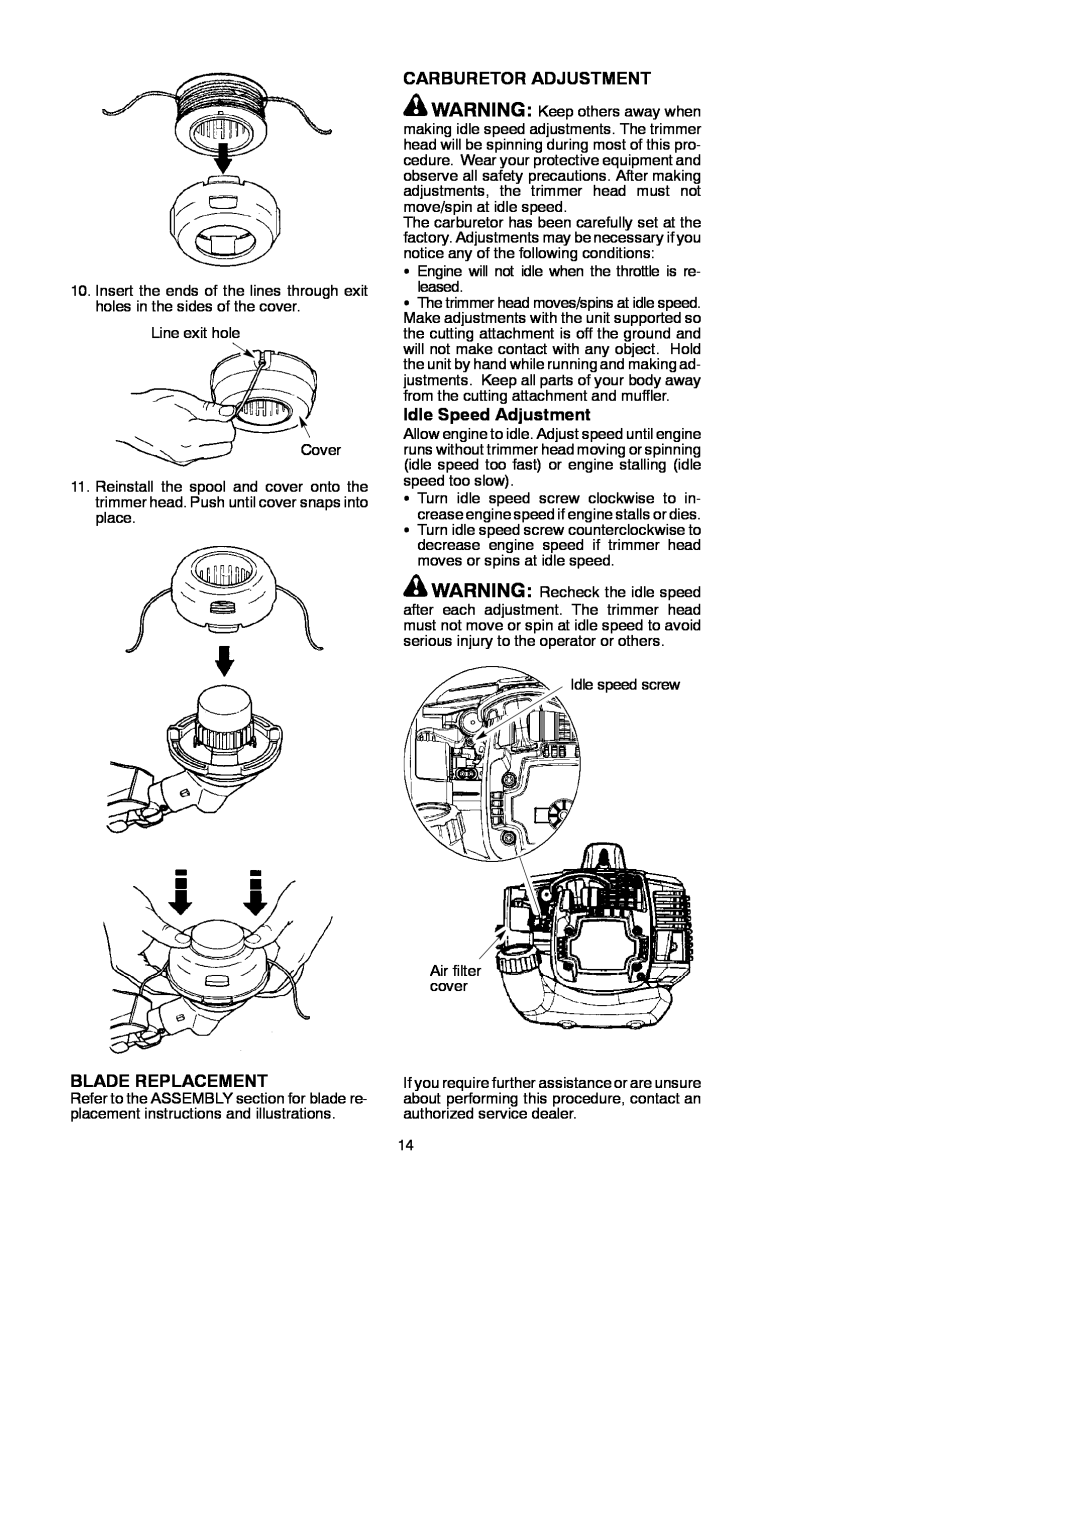 McCulloch 115154526, 952715746, 433B instruction manual Carburetor Adjustment, Idle Speed Adjustment, Blade Replacement 